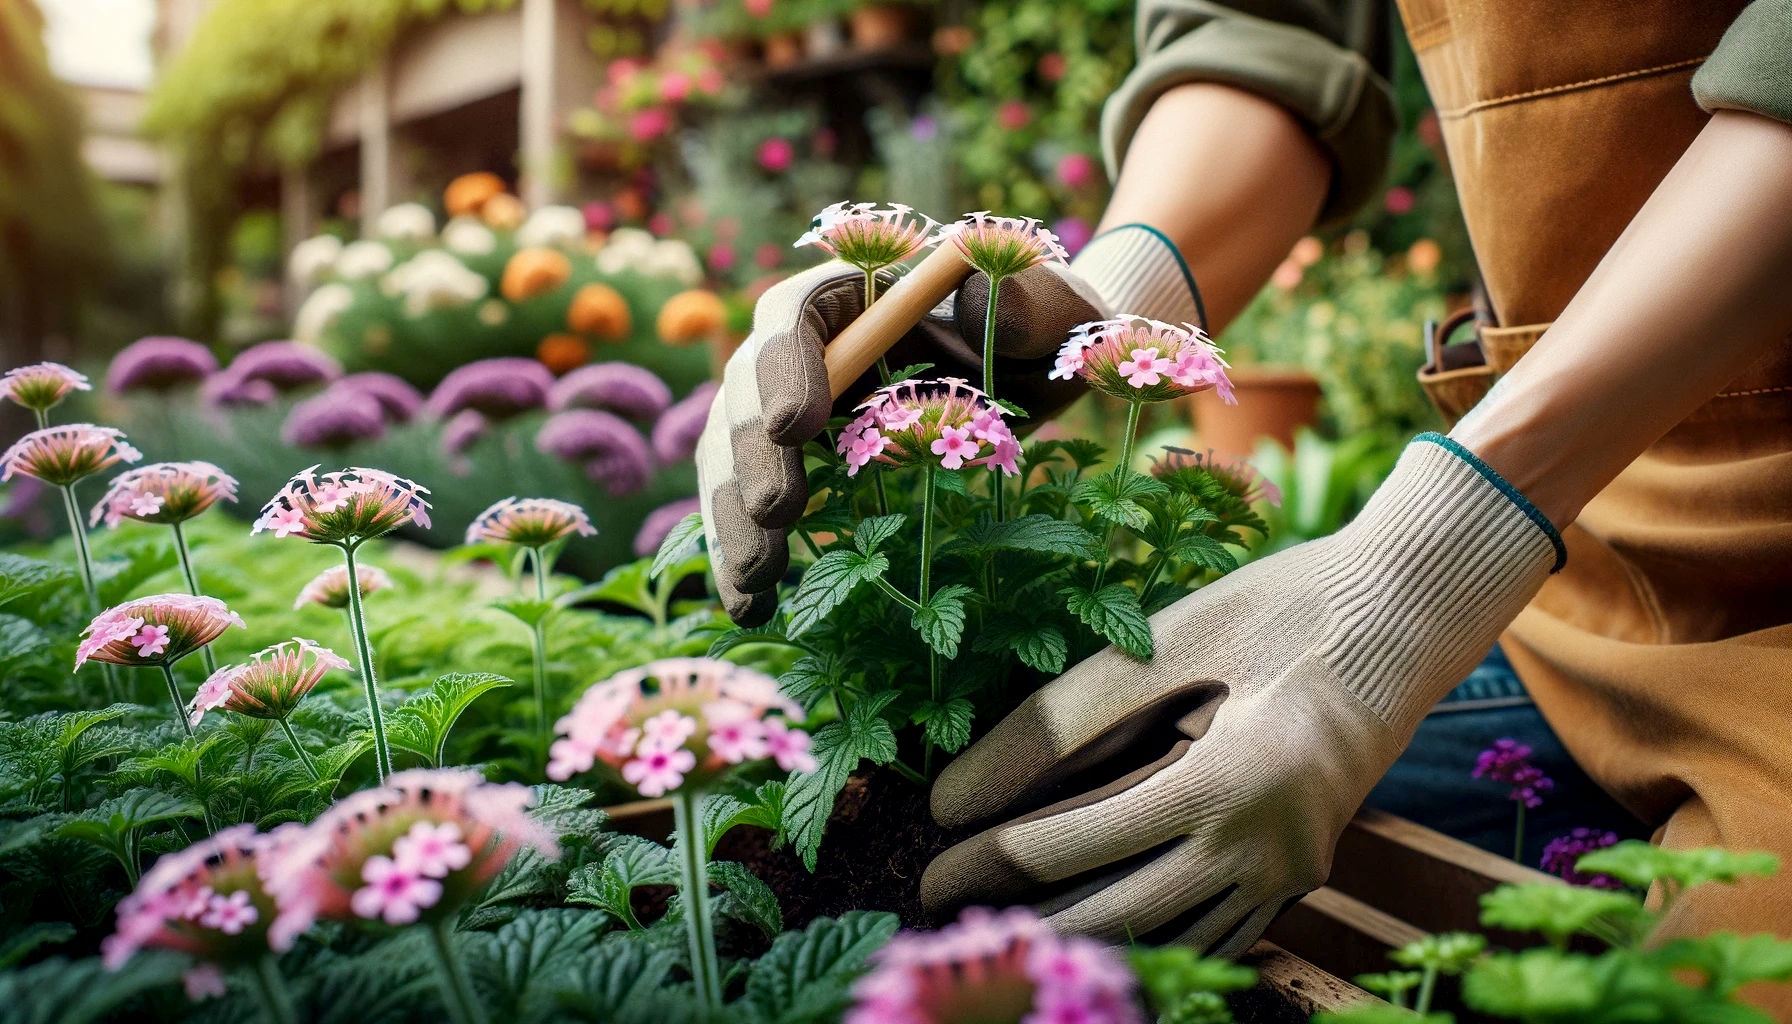 In this image, we see a person gently caring for Verbena plants in a garden. The focus on the gardener's interaction with the vibrant Verbena highlights both the visual appeal and the ease of care of the plant. The well-maintained garden setting in the background subtly nods to the rich history and story of Verbena, blending beauty, tradition, and practicality in a single scene.